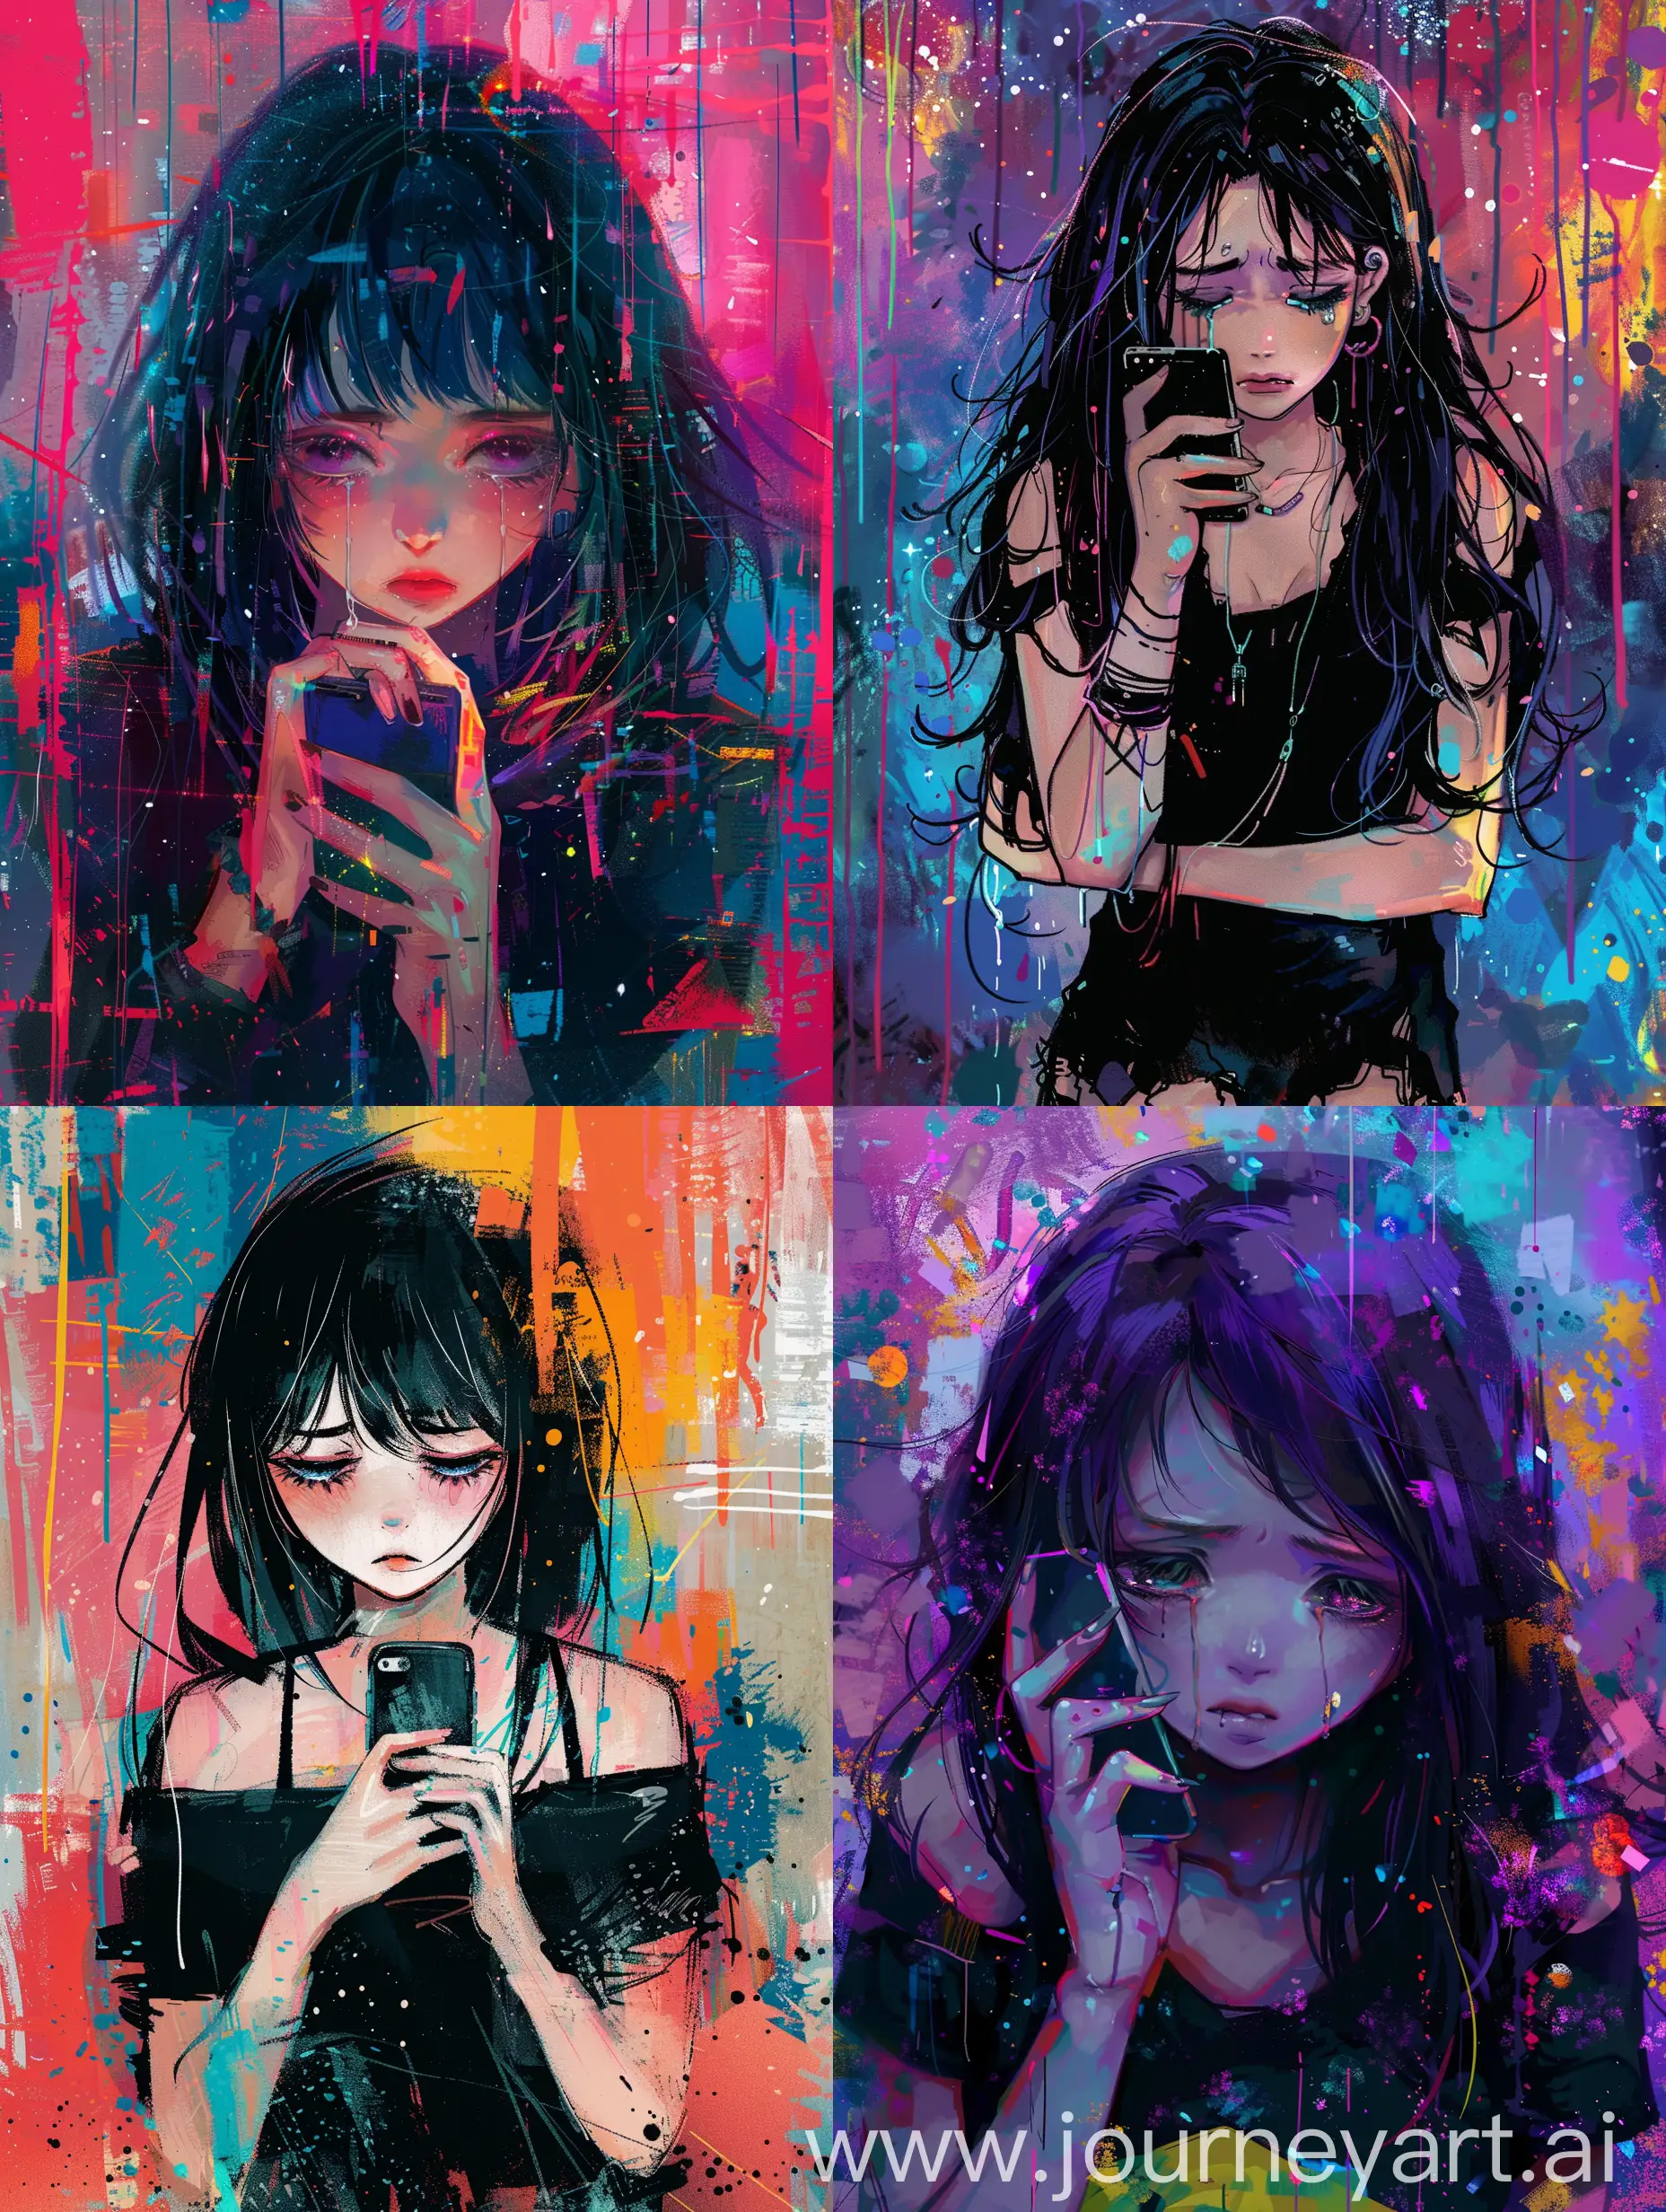 anime emo girl sad, she holding a phone, with abstract background